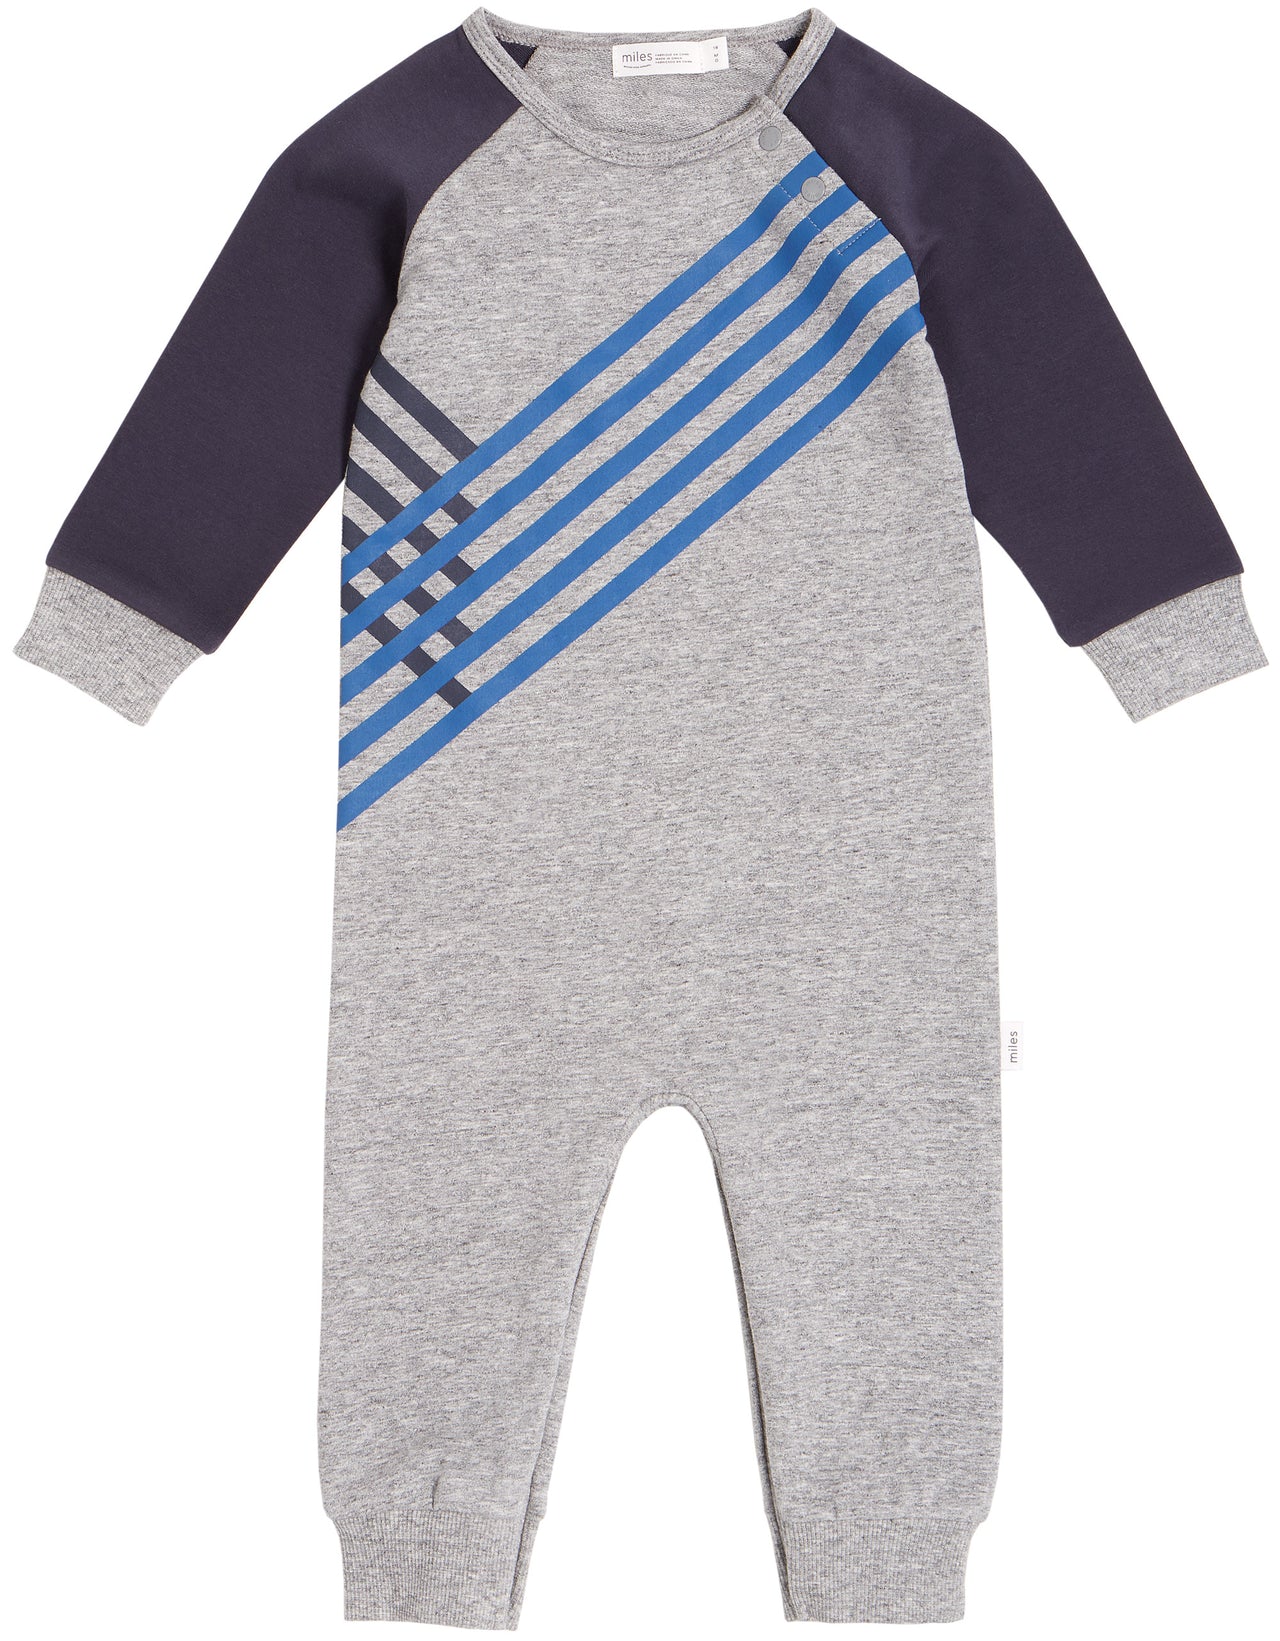 MILES INFANT TRACK KNIT PLAY SUIT - HEATHER GREY/BLUE